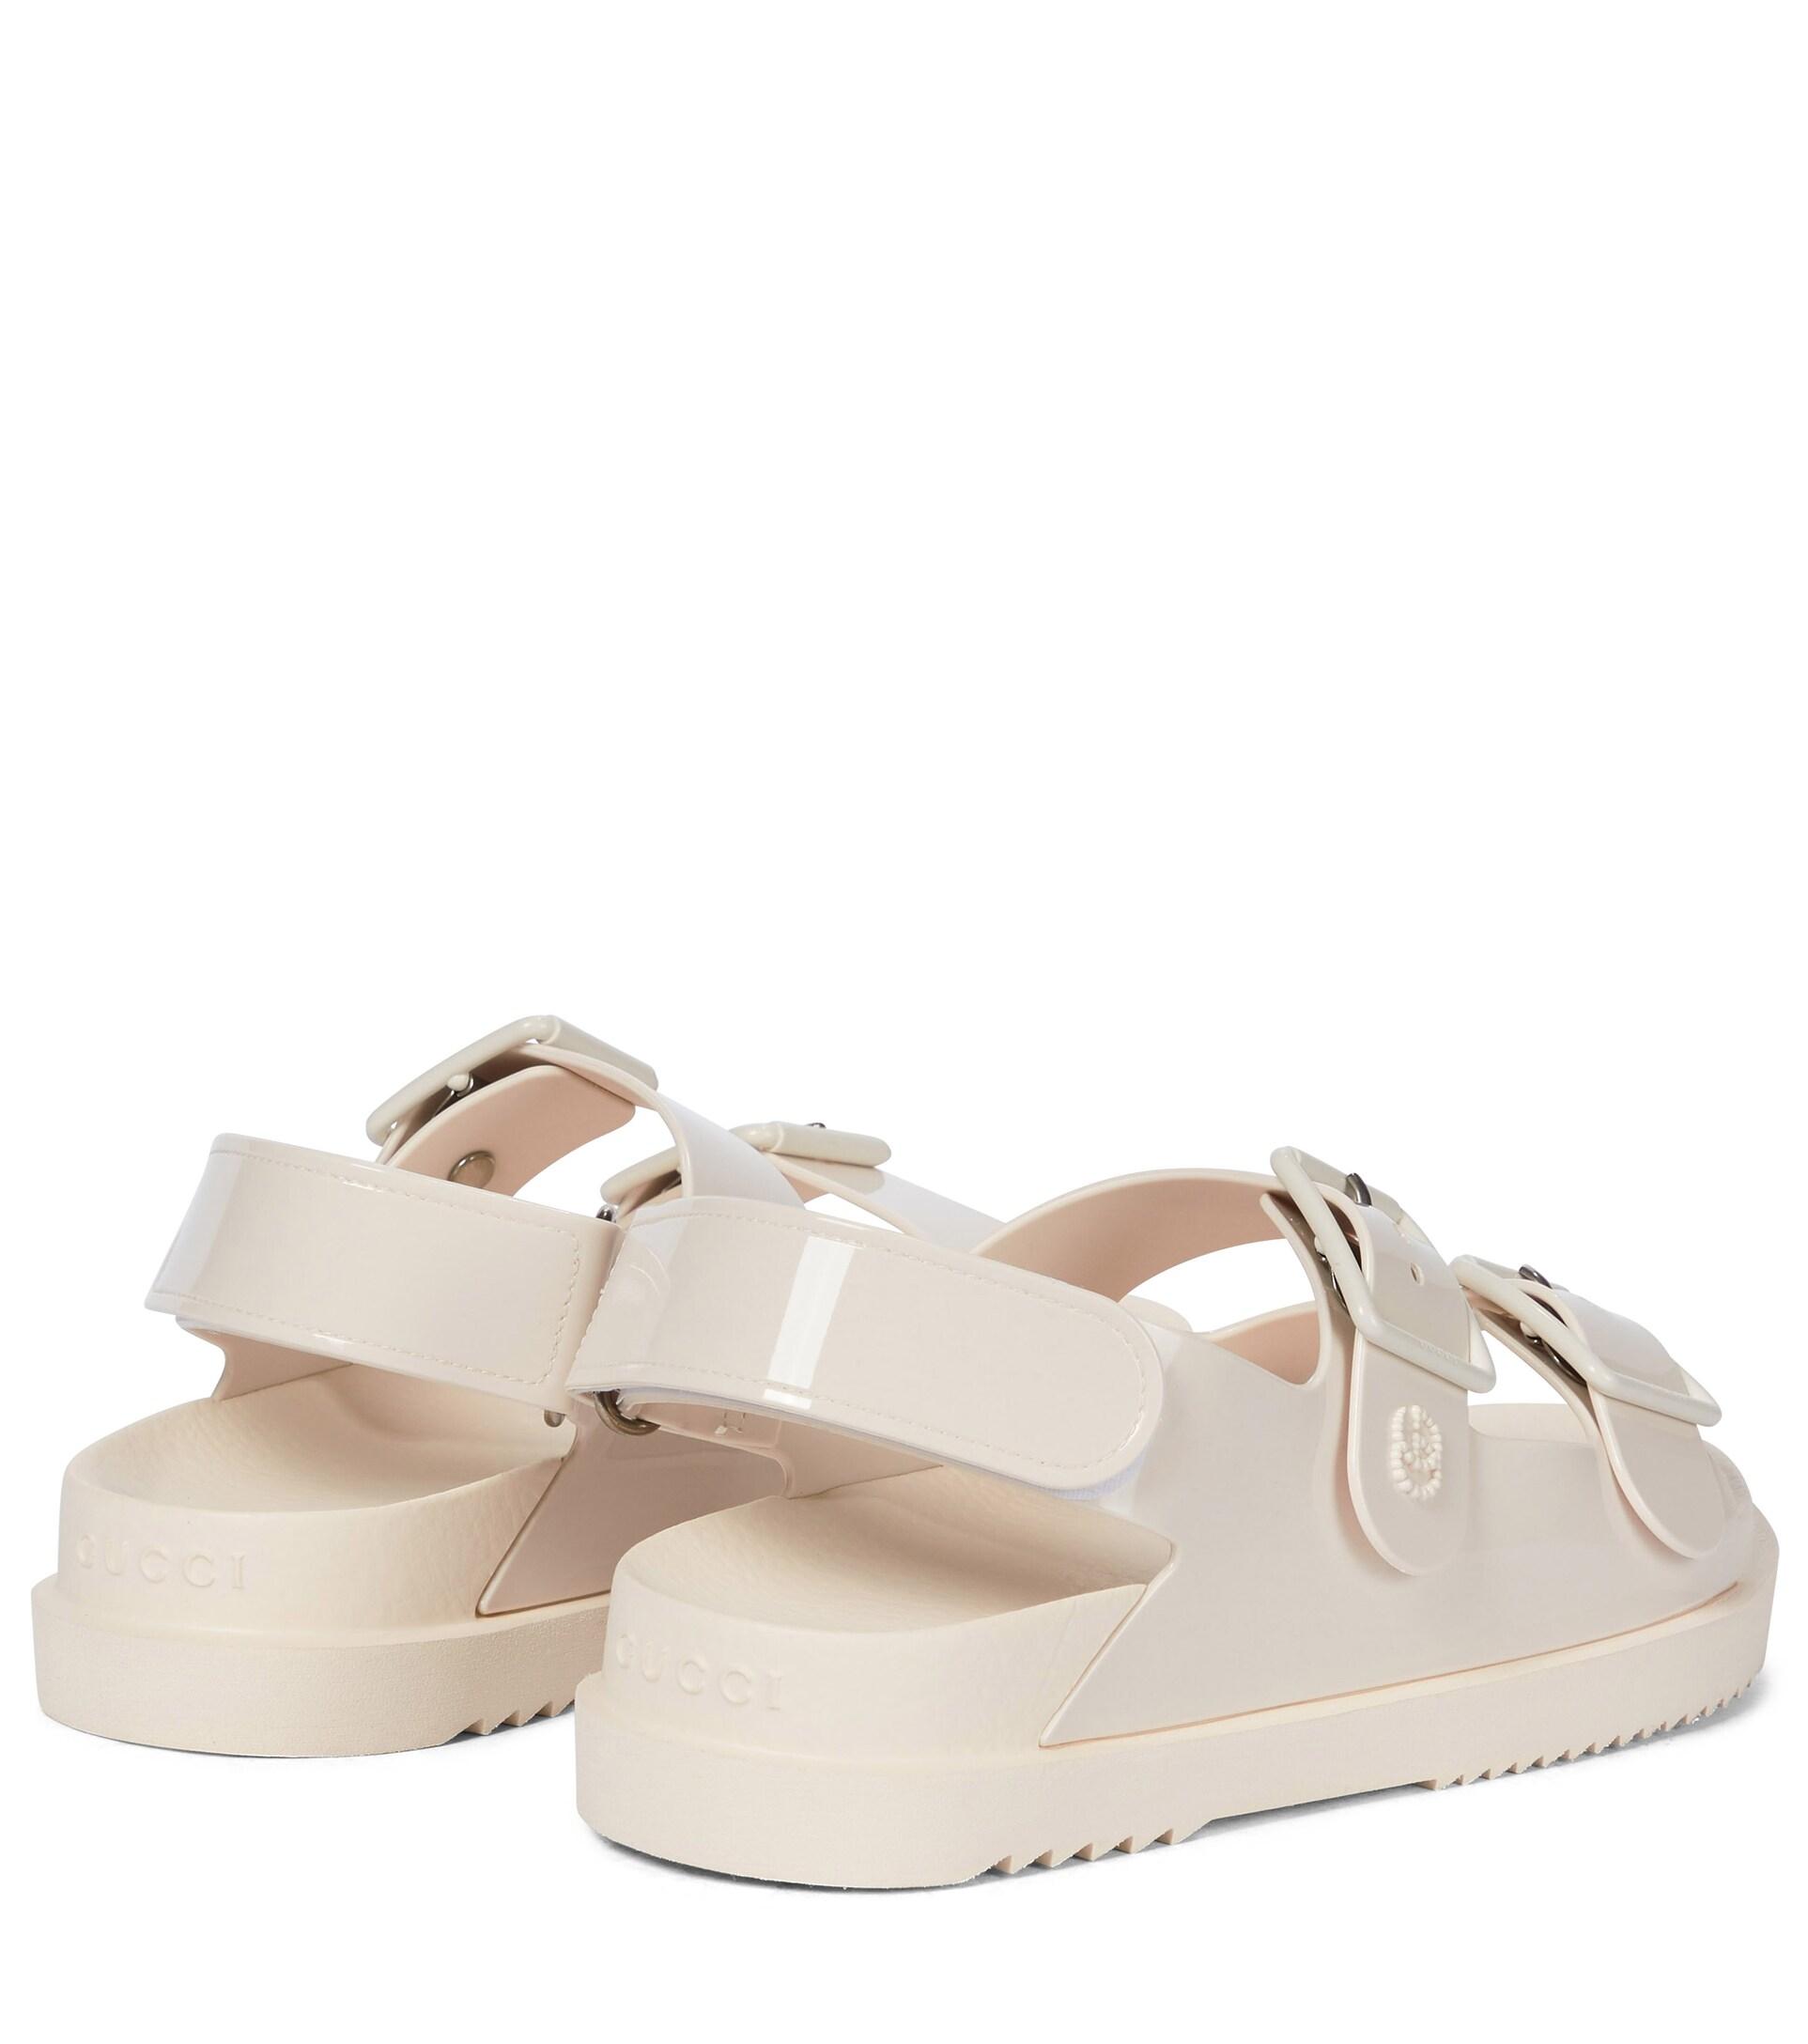 Gucci Rubber Sandals in Lyst